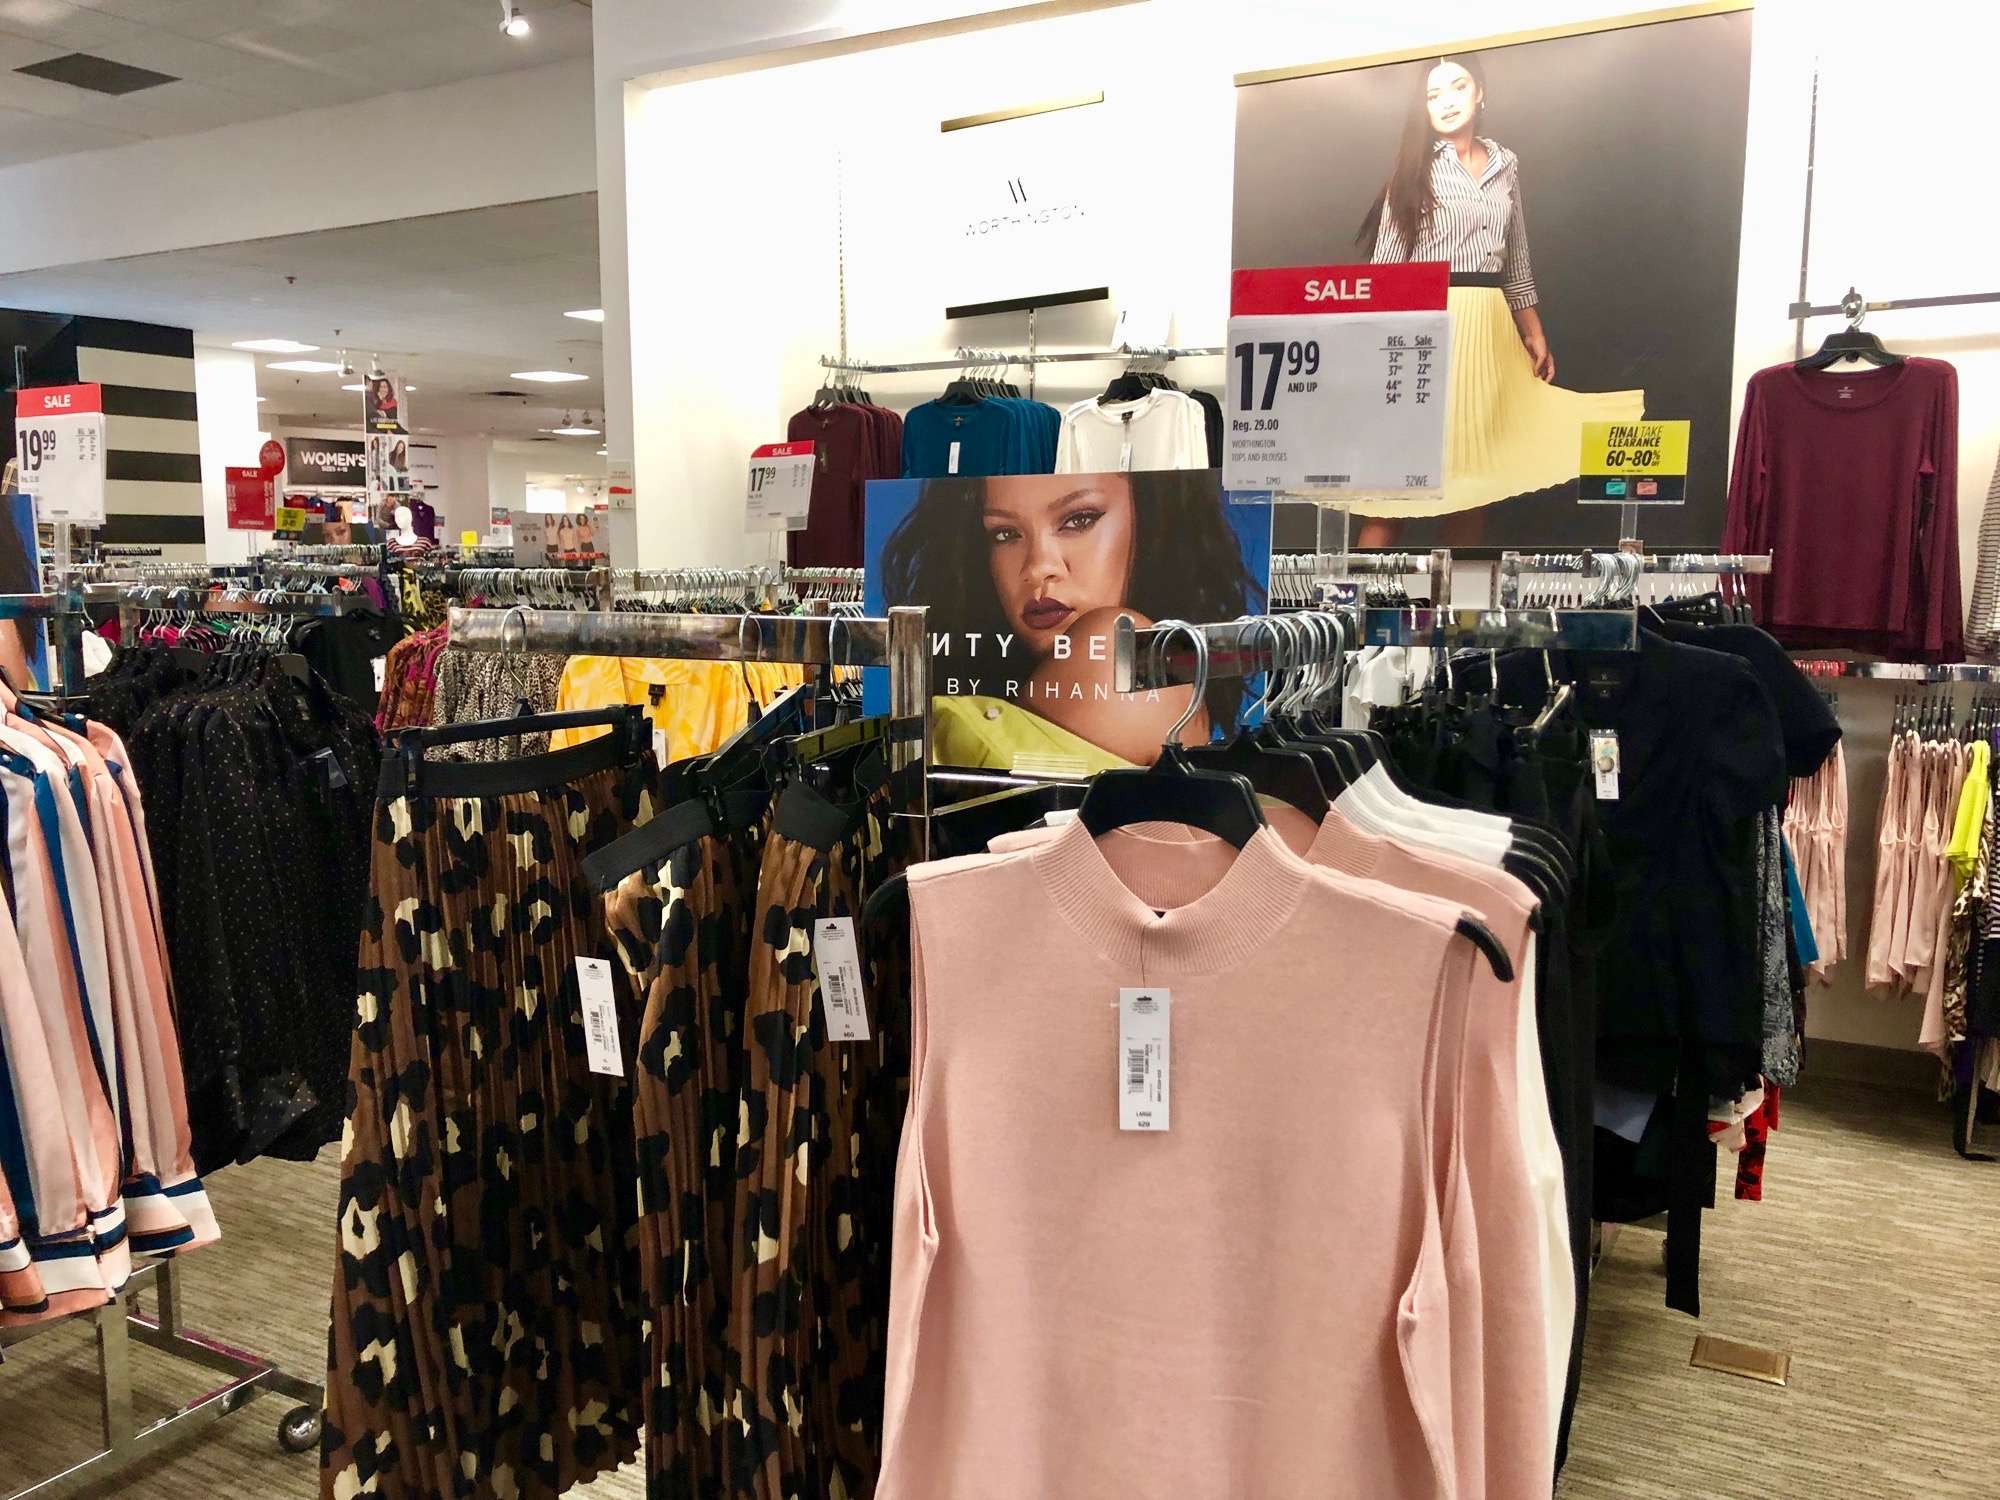 These signs on every single mannequin in a Kohl's store. That's